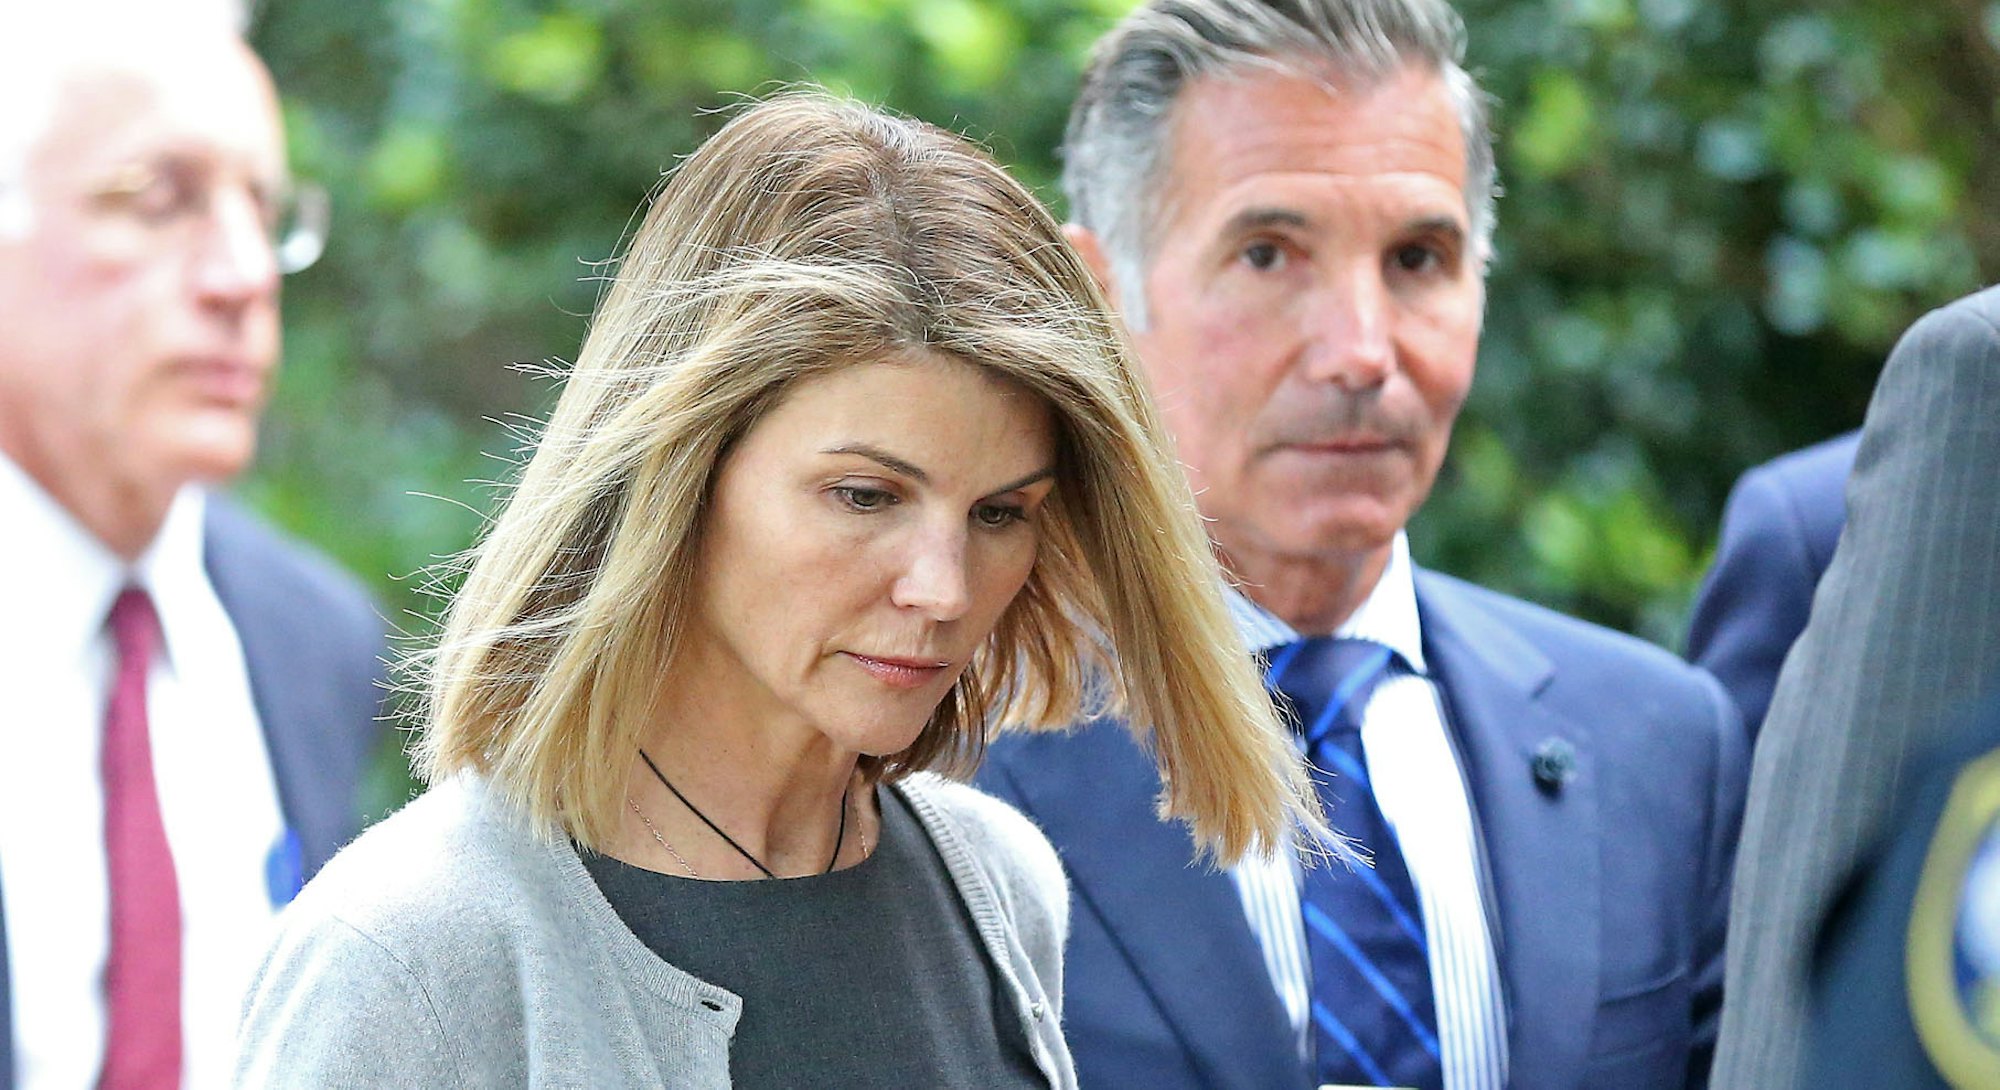 BOSTON MA. - AUGUST 27:  Actress Lori Loughlin and her husband Mossimo Giannulli leave Moakley Feder...